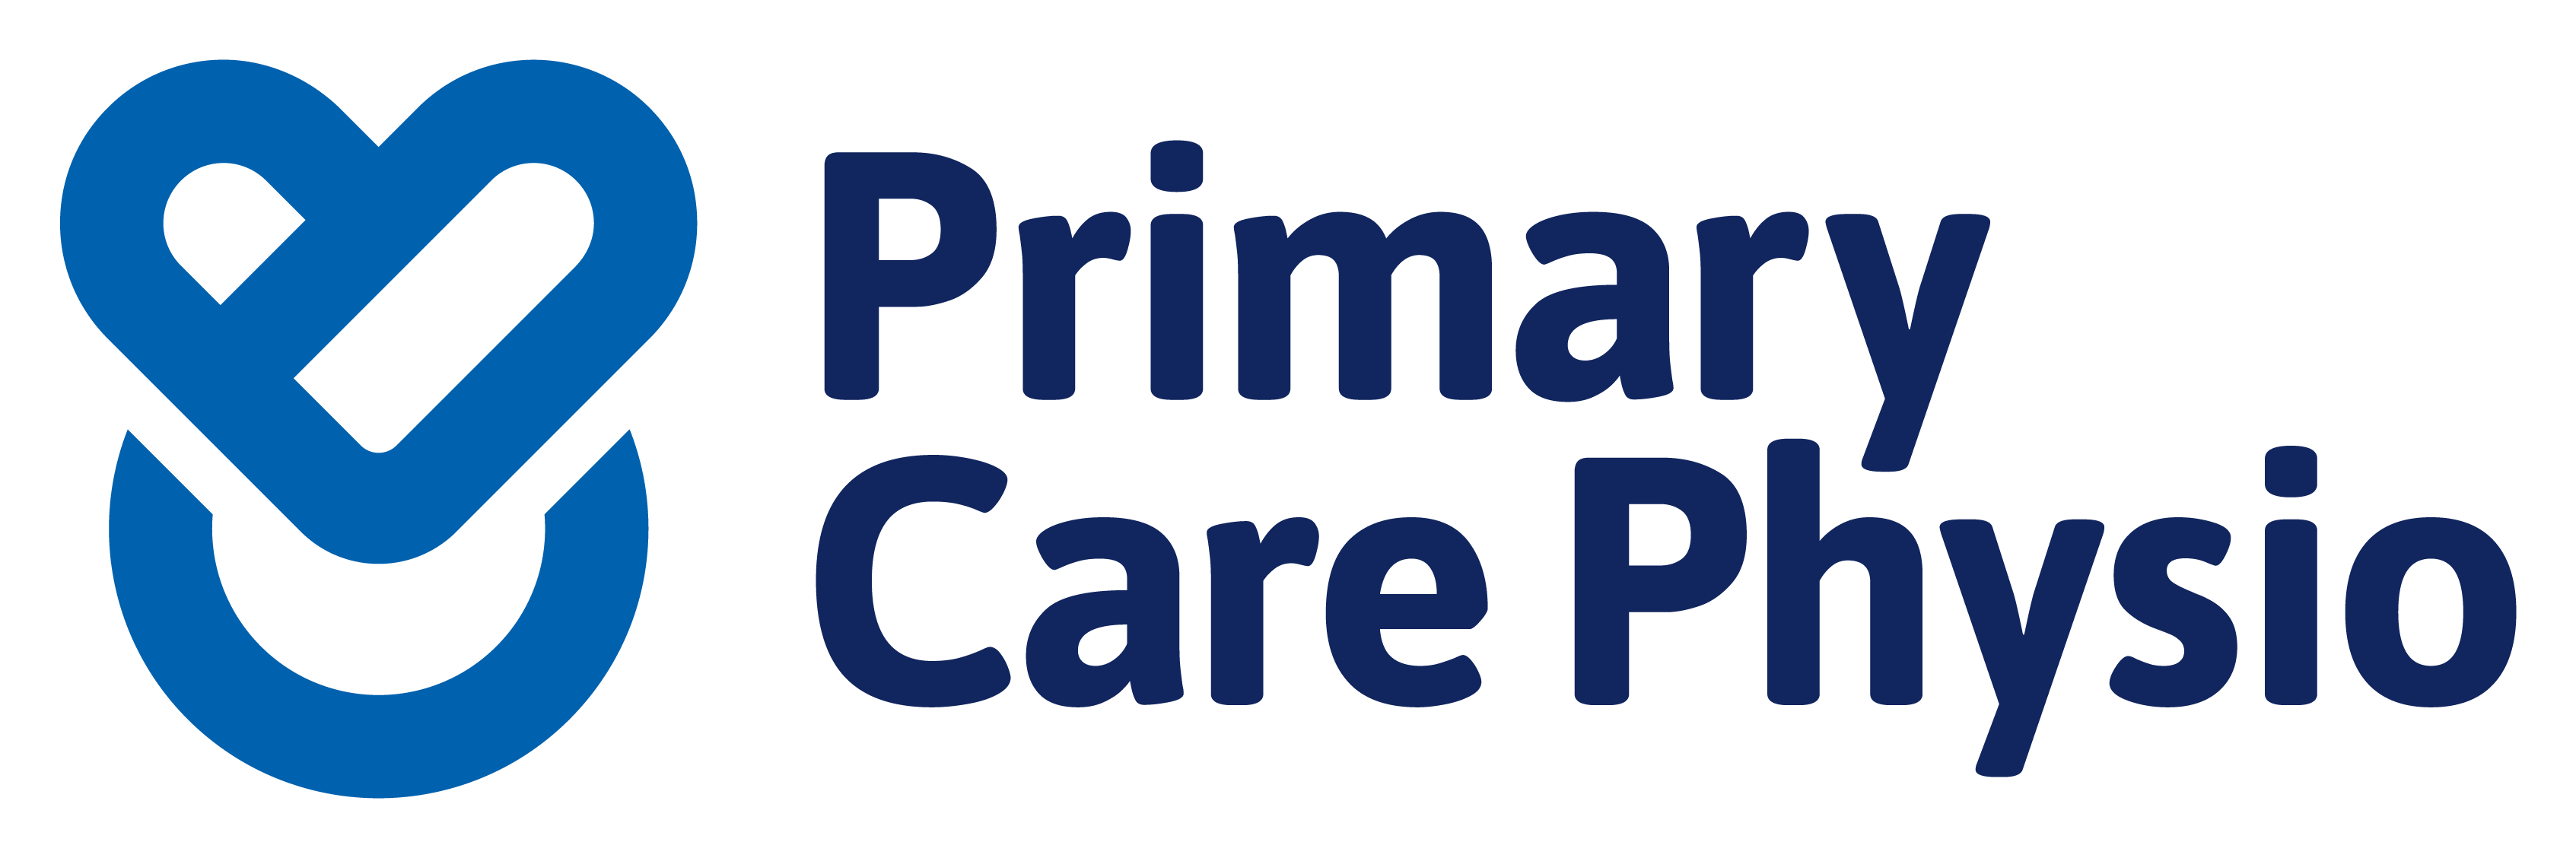 Primary Care Physio Limited